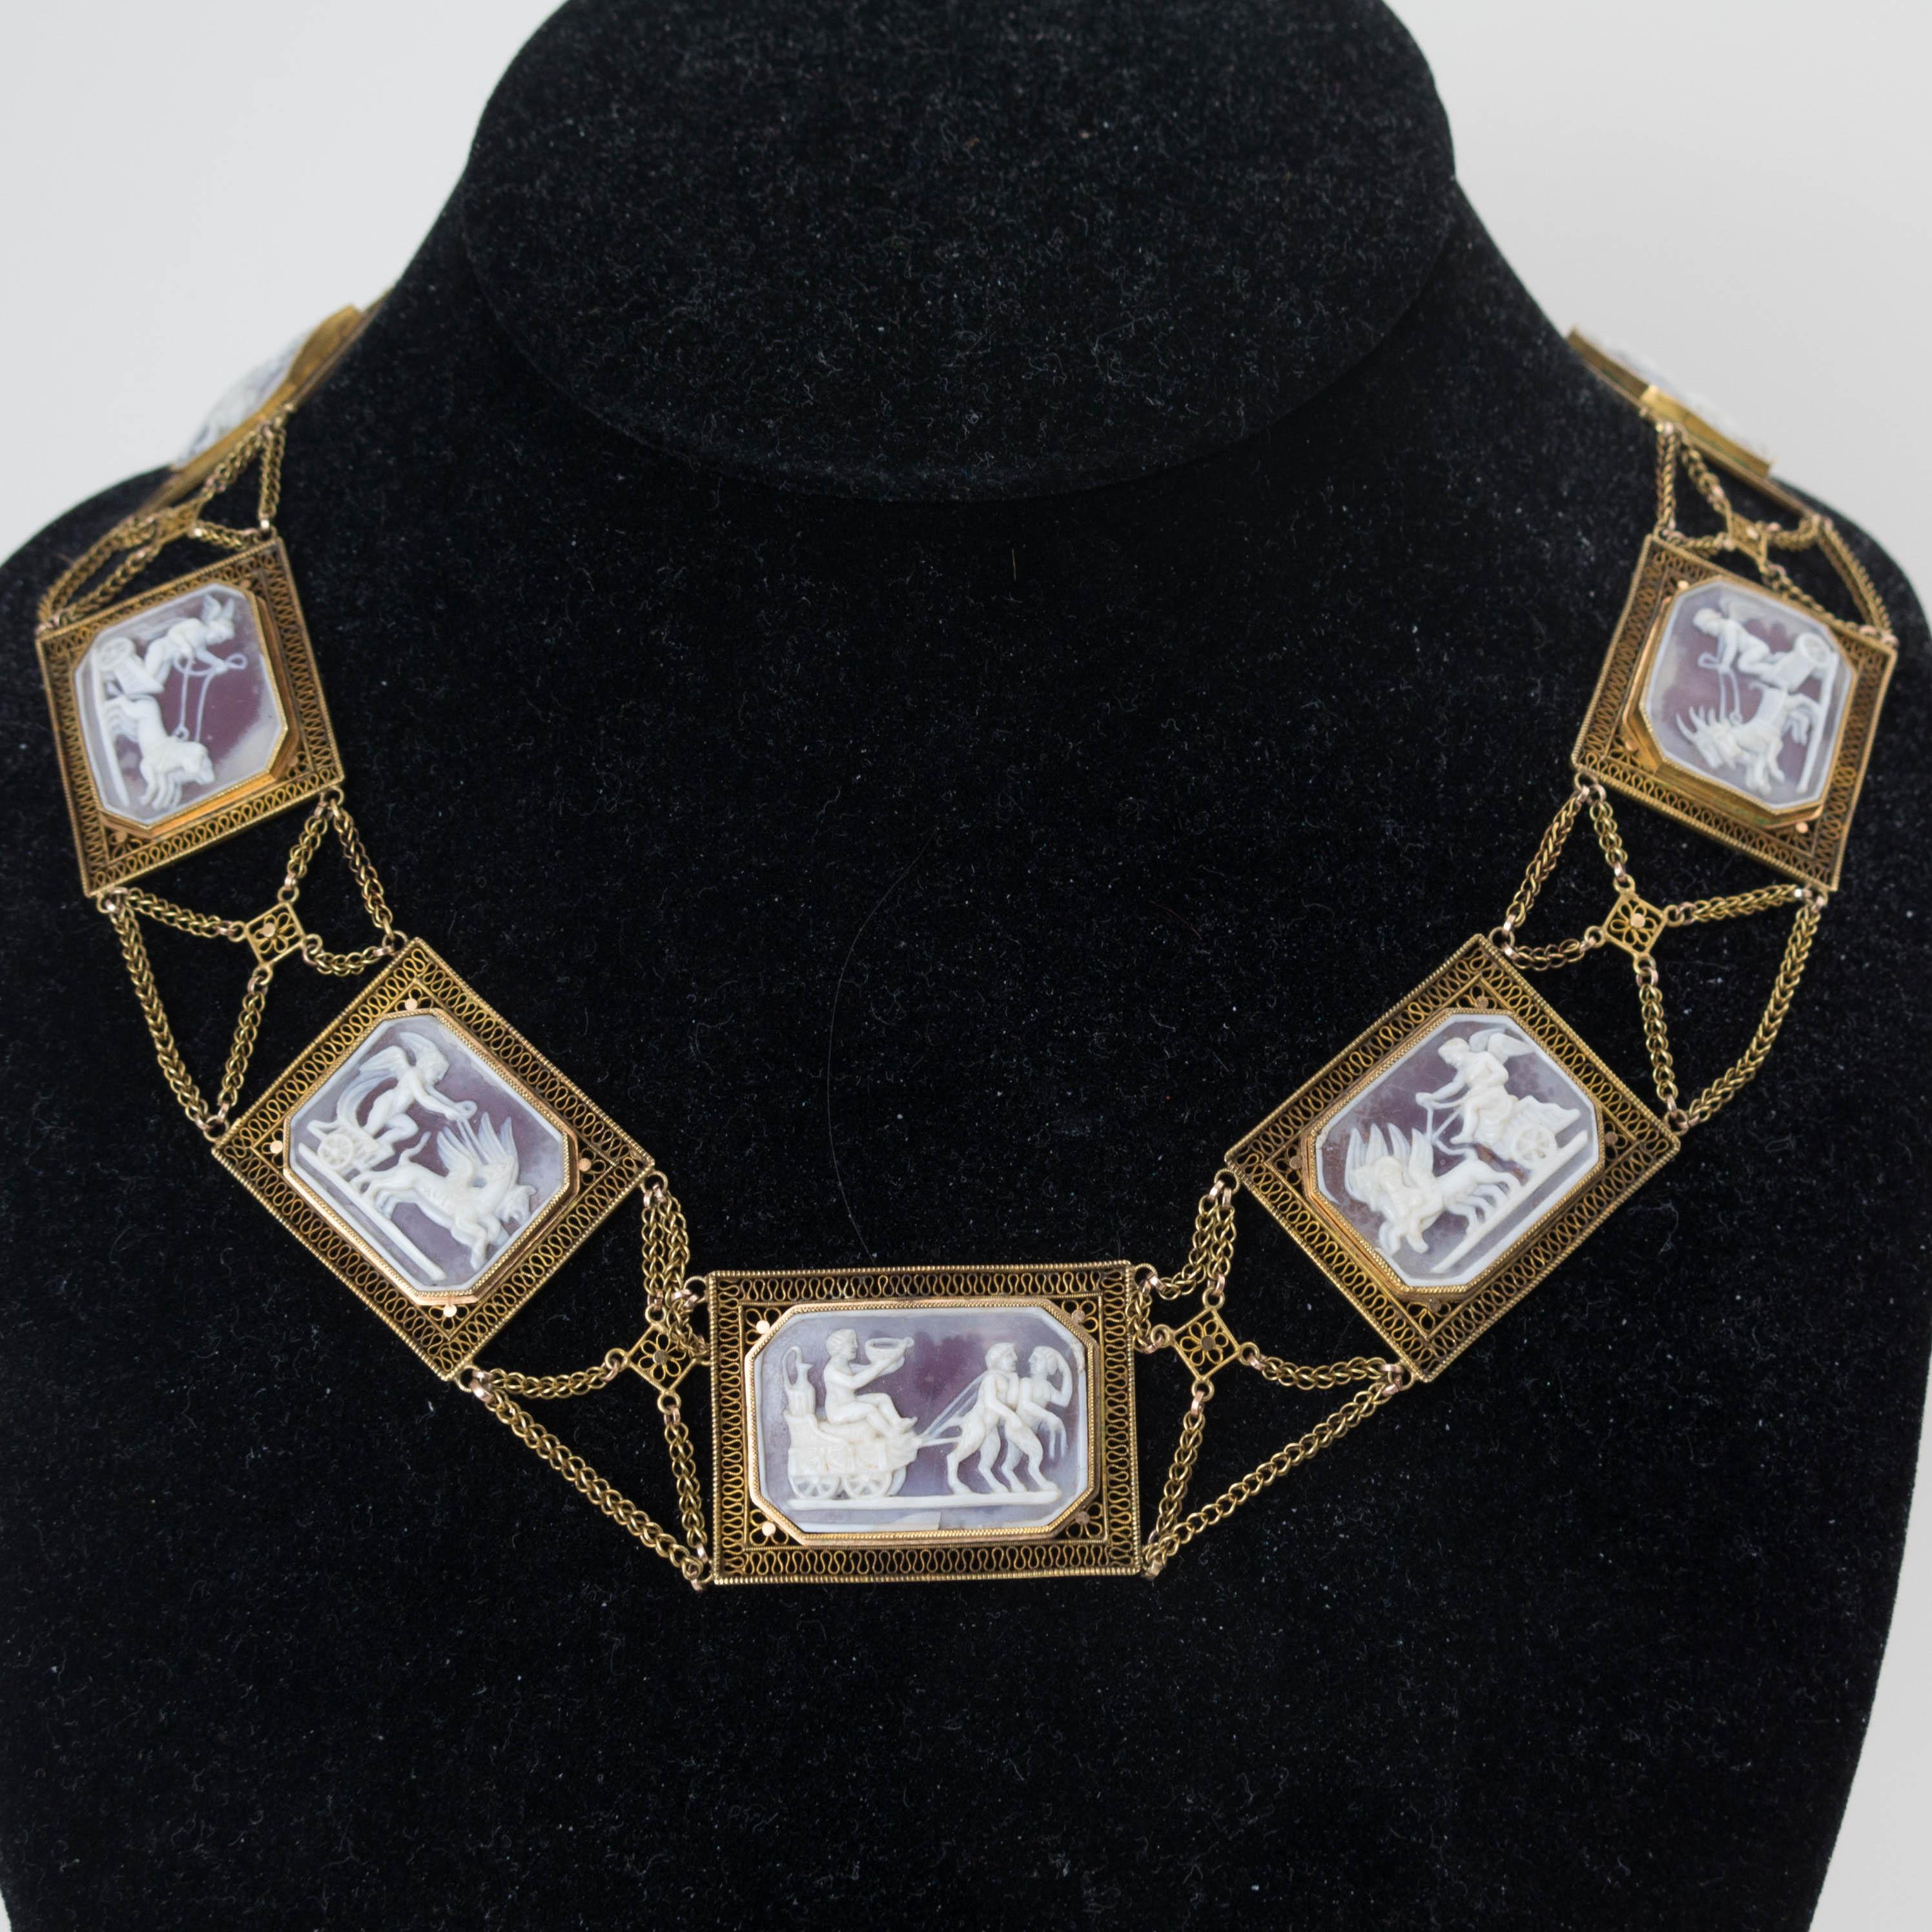 A rare early necklace of hardstone cameos panels depicting putti drawing chariots pulled by mythical beasts. Set in 18k gold. French circa 1805 - 1810. Total length :16”. 
Gross weight: 54.3 grams.